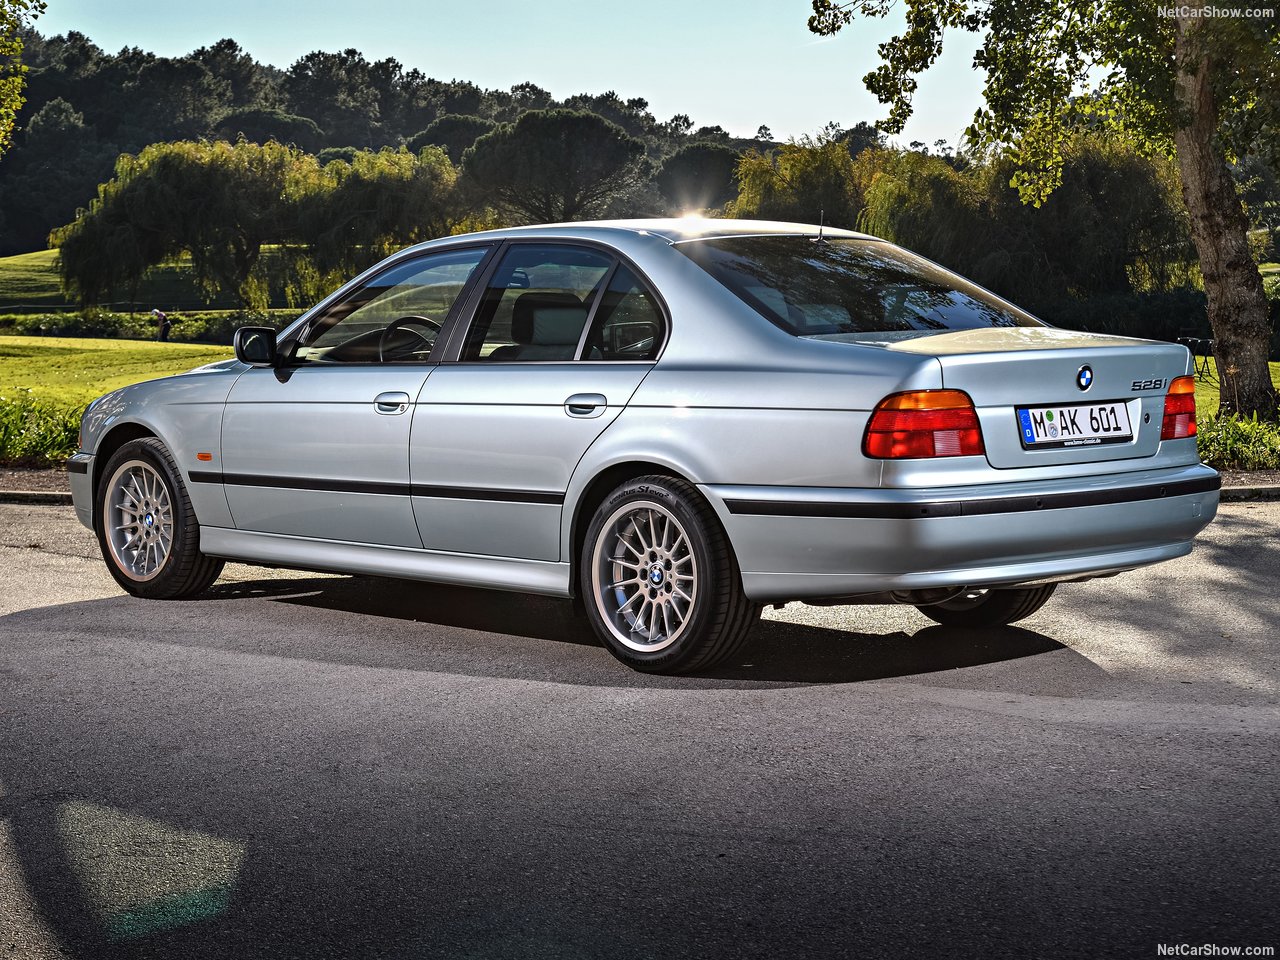 The BMW E39 5 Series is the perfect modern classic